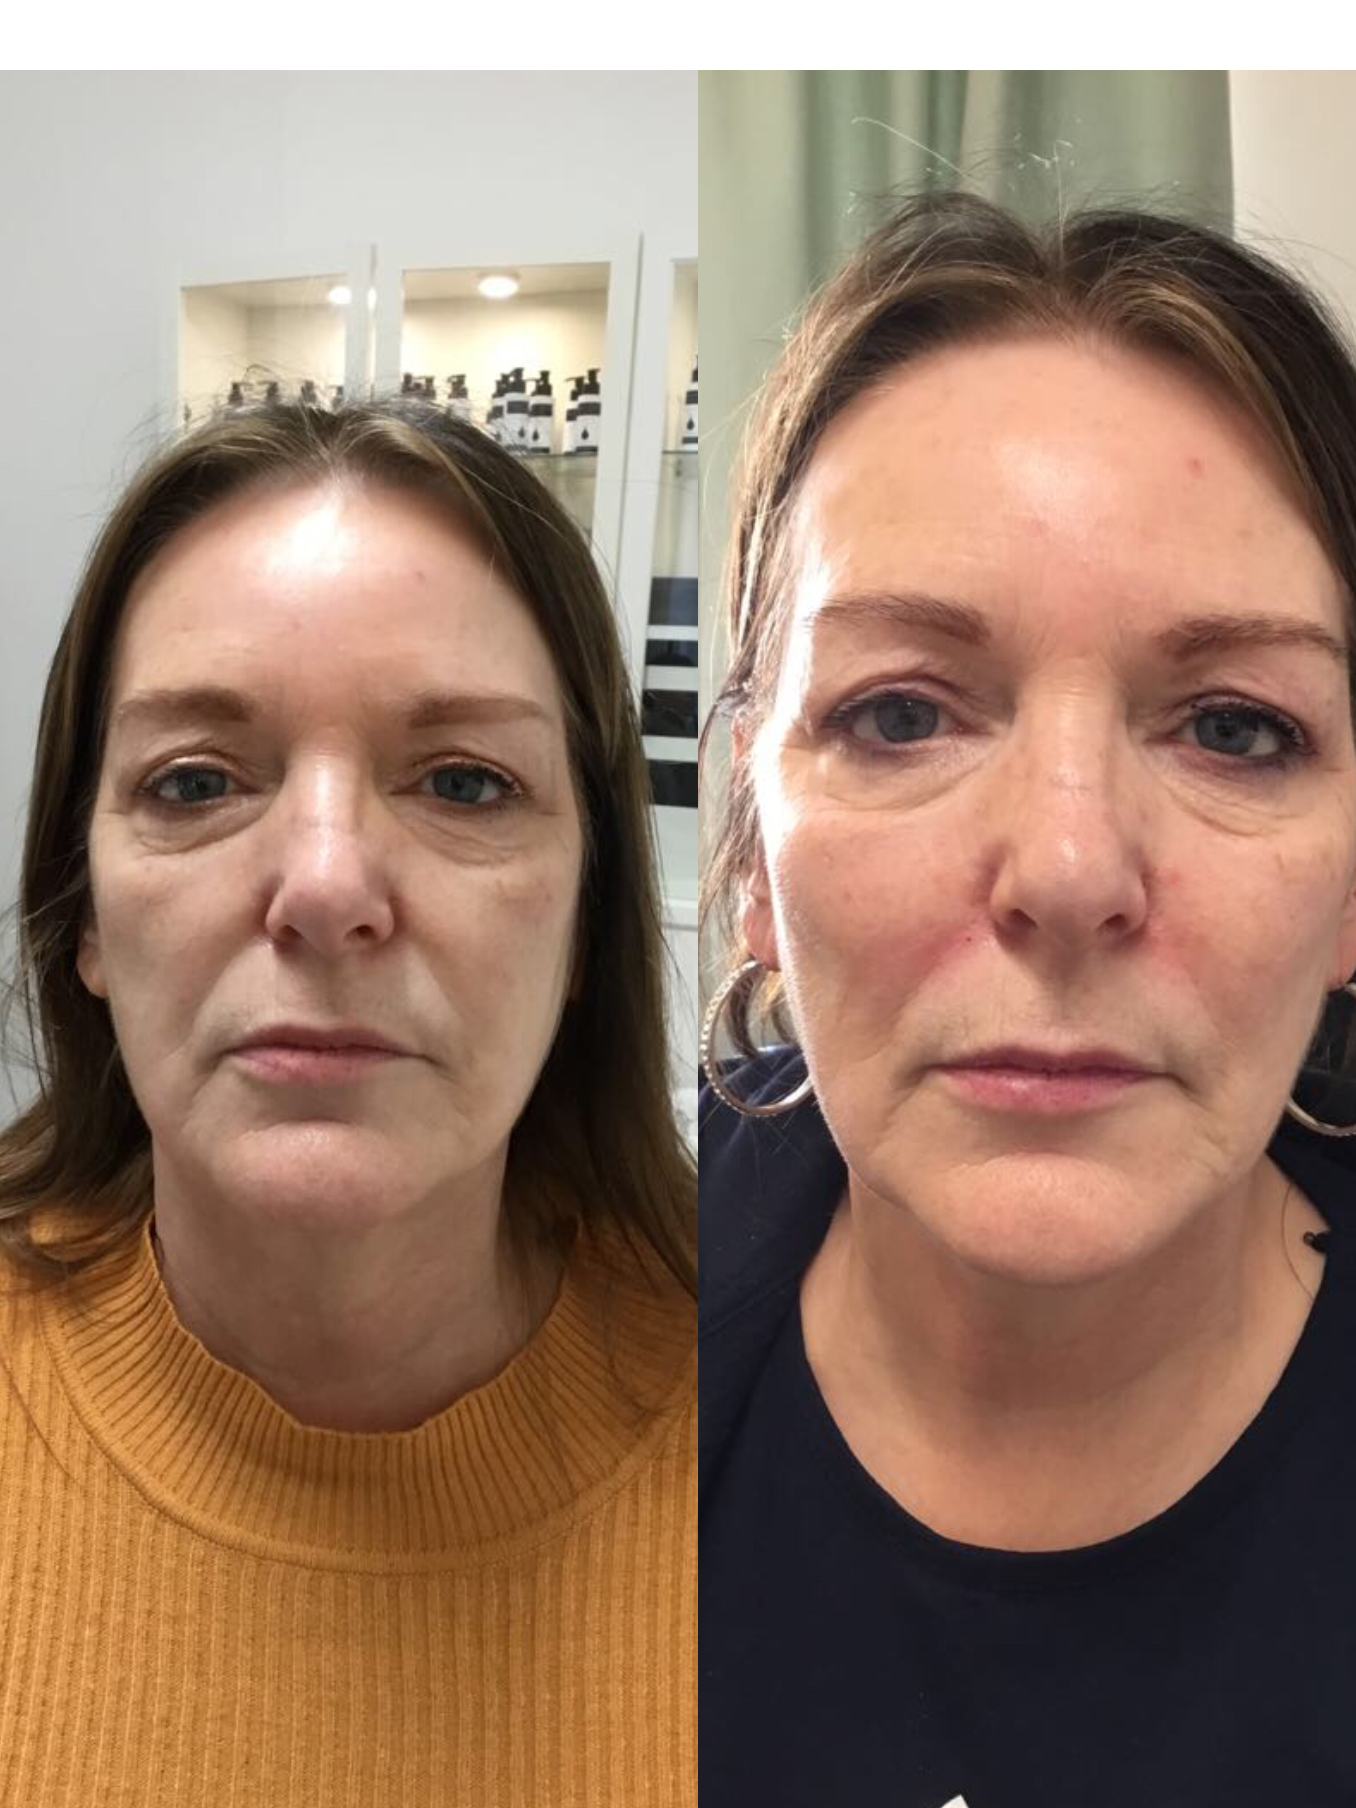 non surgical facelift in london using fillers before and after over 50